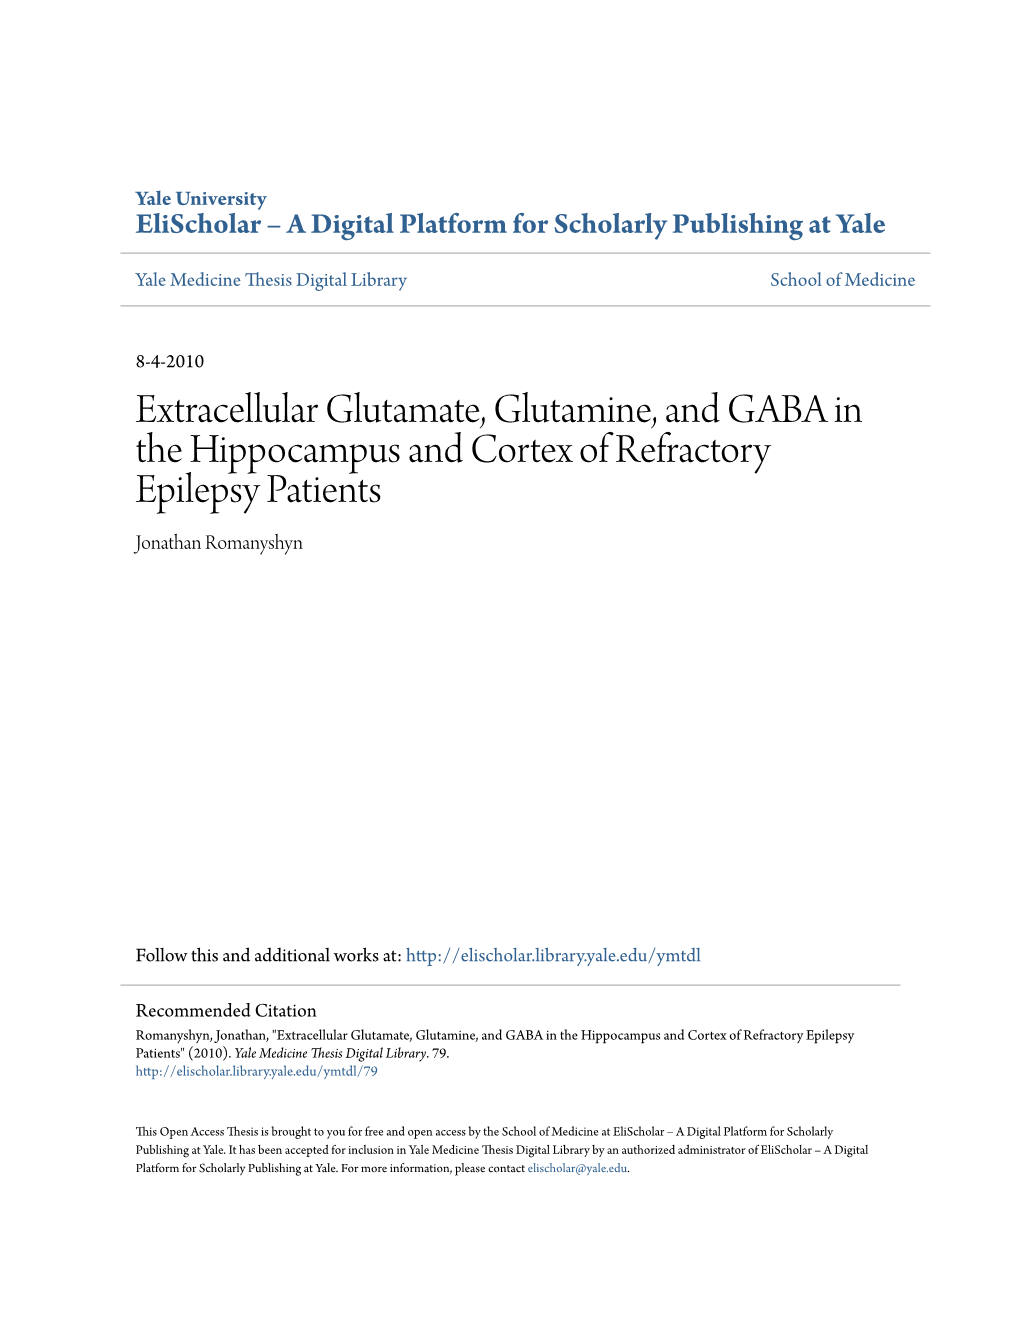 Extracellular Glutamate, Glutamine, and GABA in the Hippocampus and Cortex of Refractory Epilepsy Patients Jonathan Romanyshyn